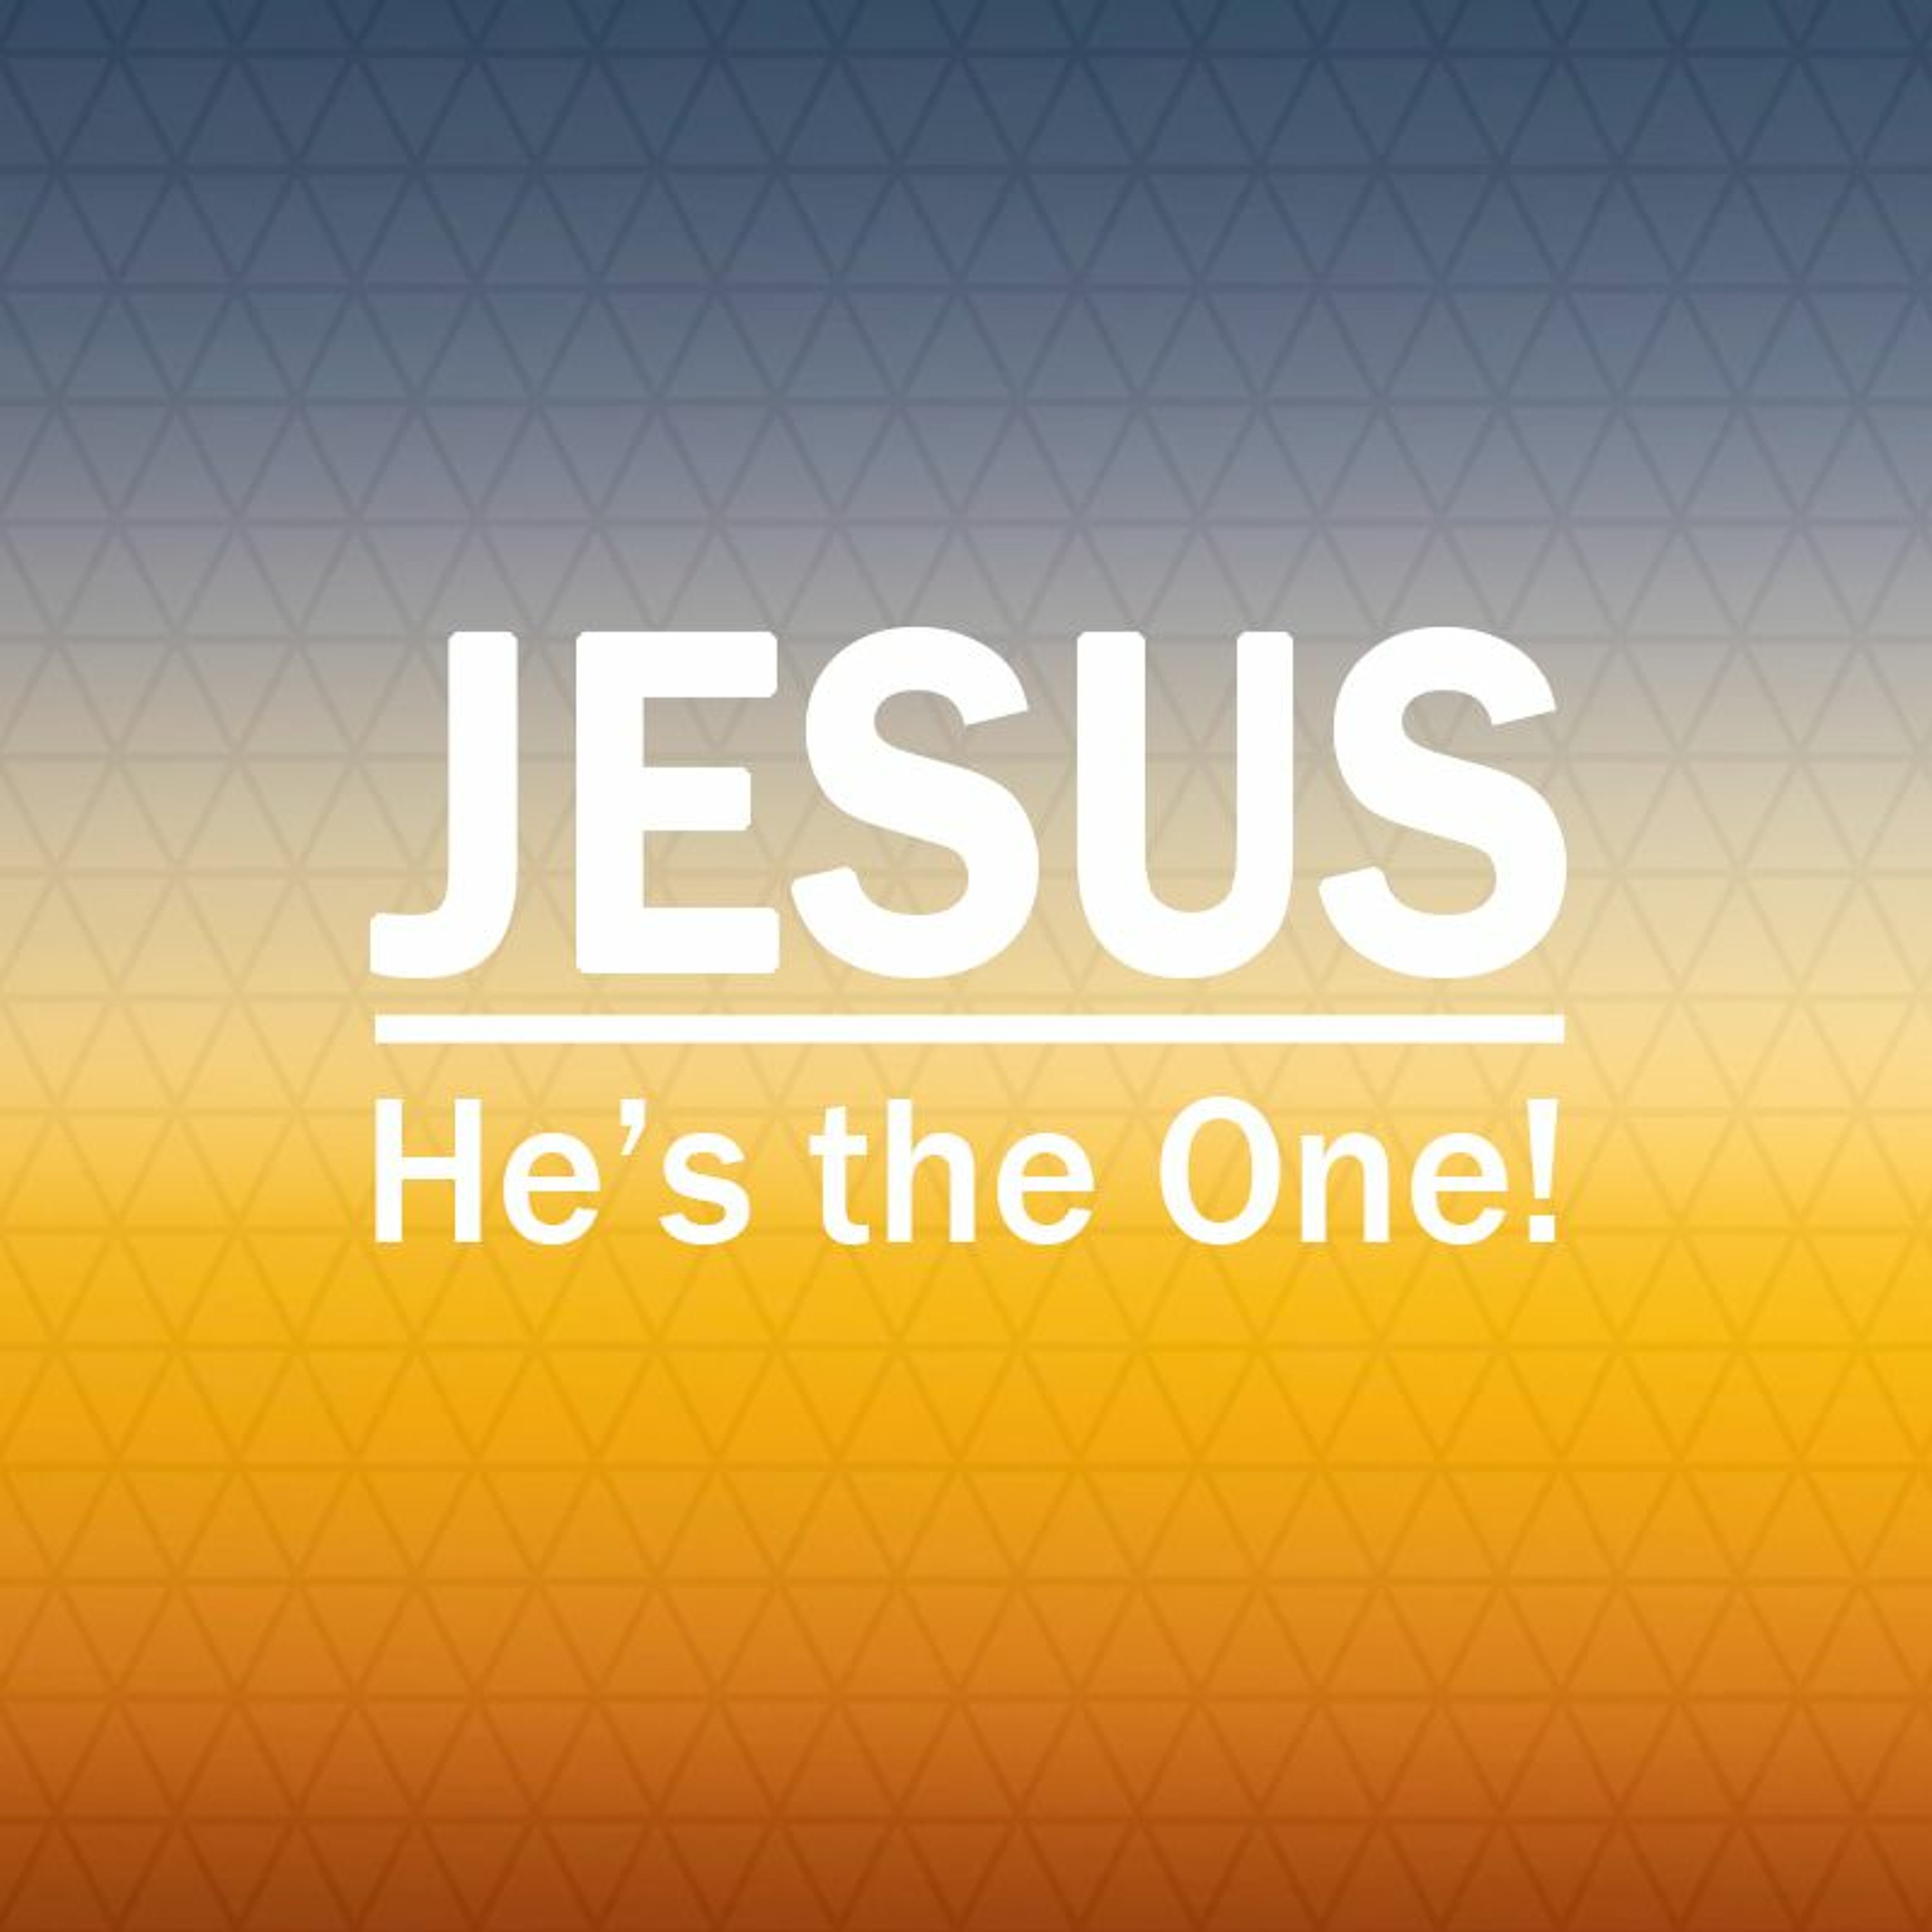 Jesus - He’s the One! | The One who calls